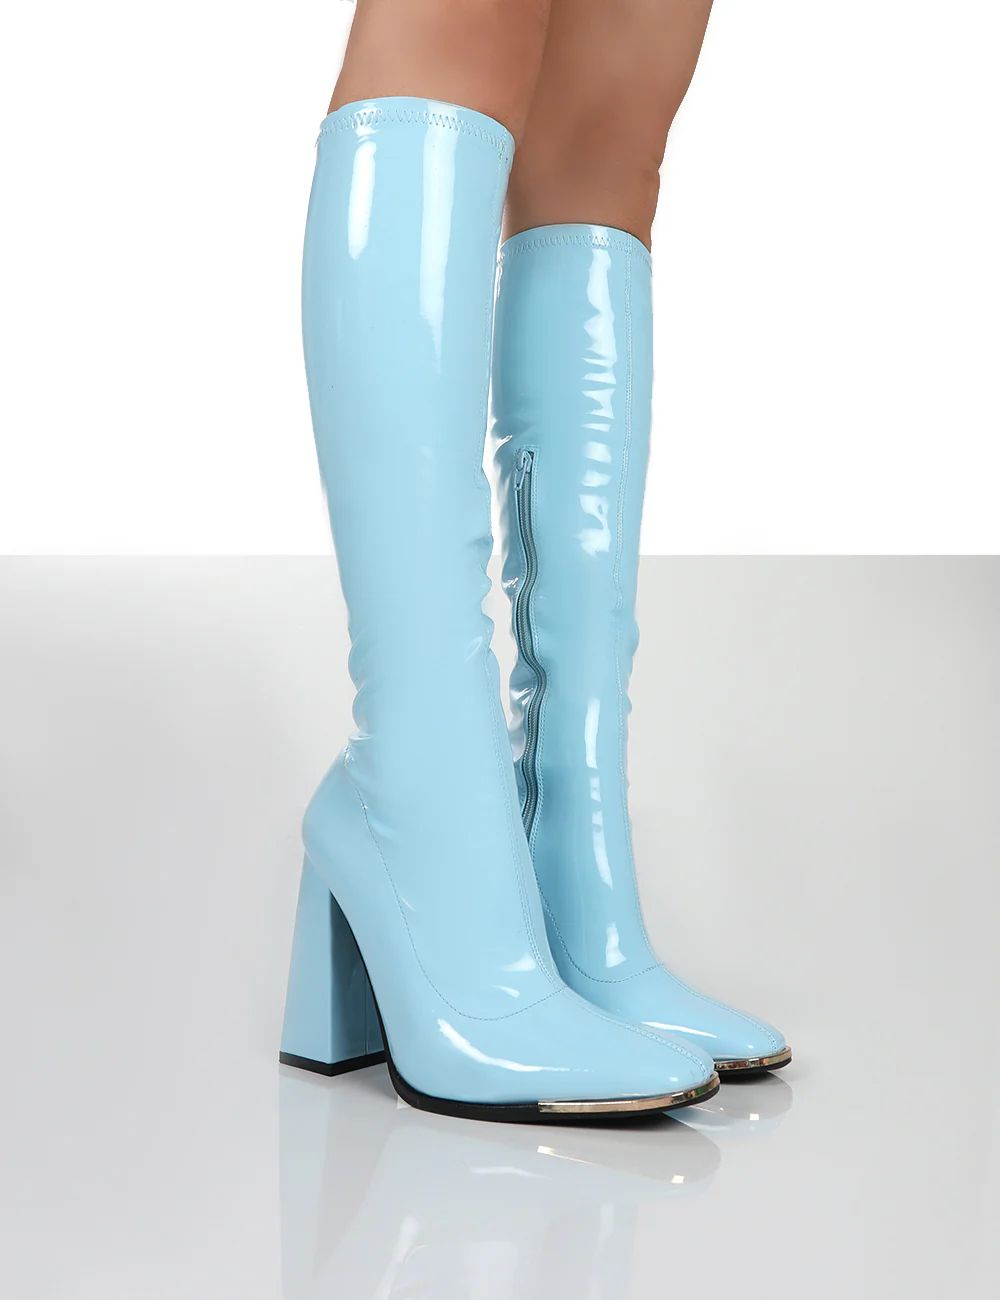 Caryn Blue Patent Knee High Heeled Boots | Public Desire